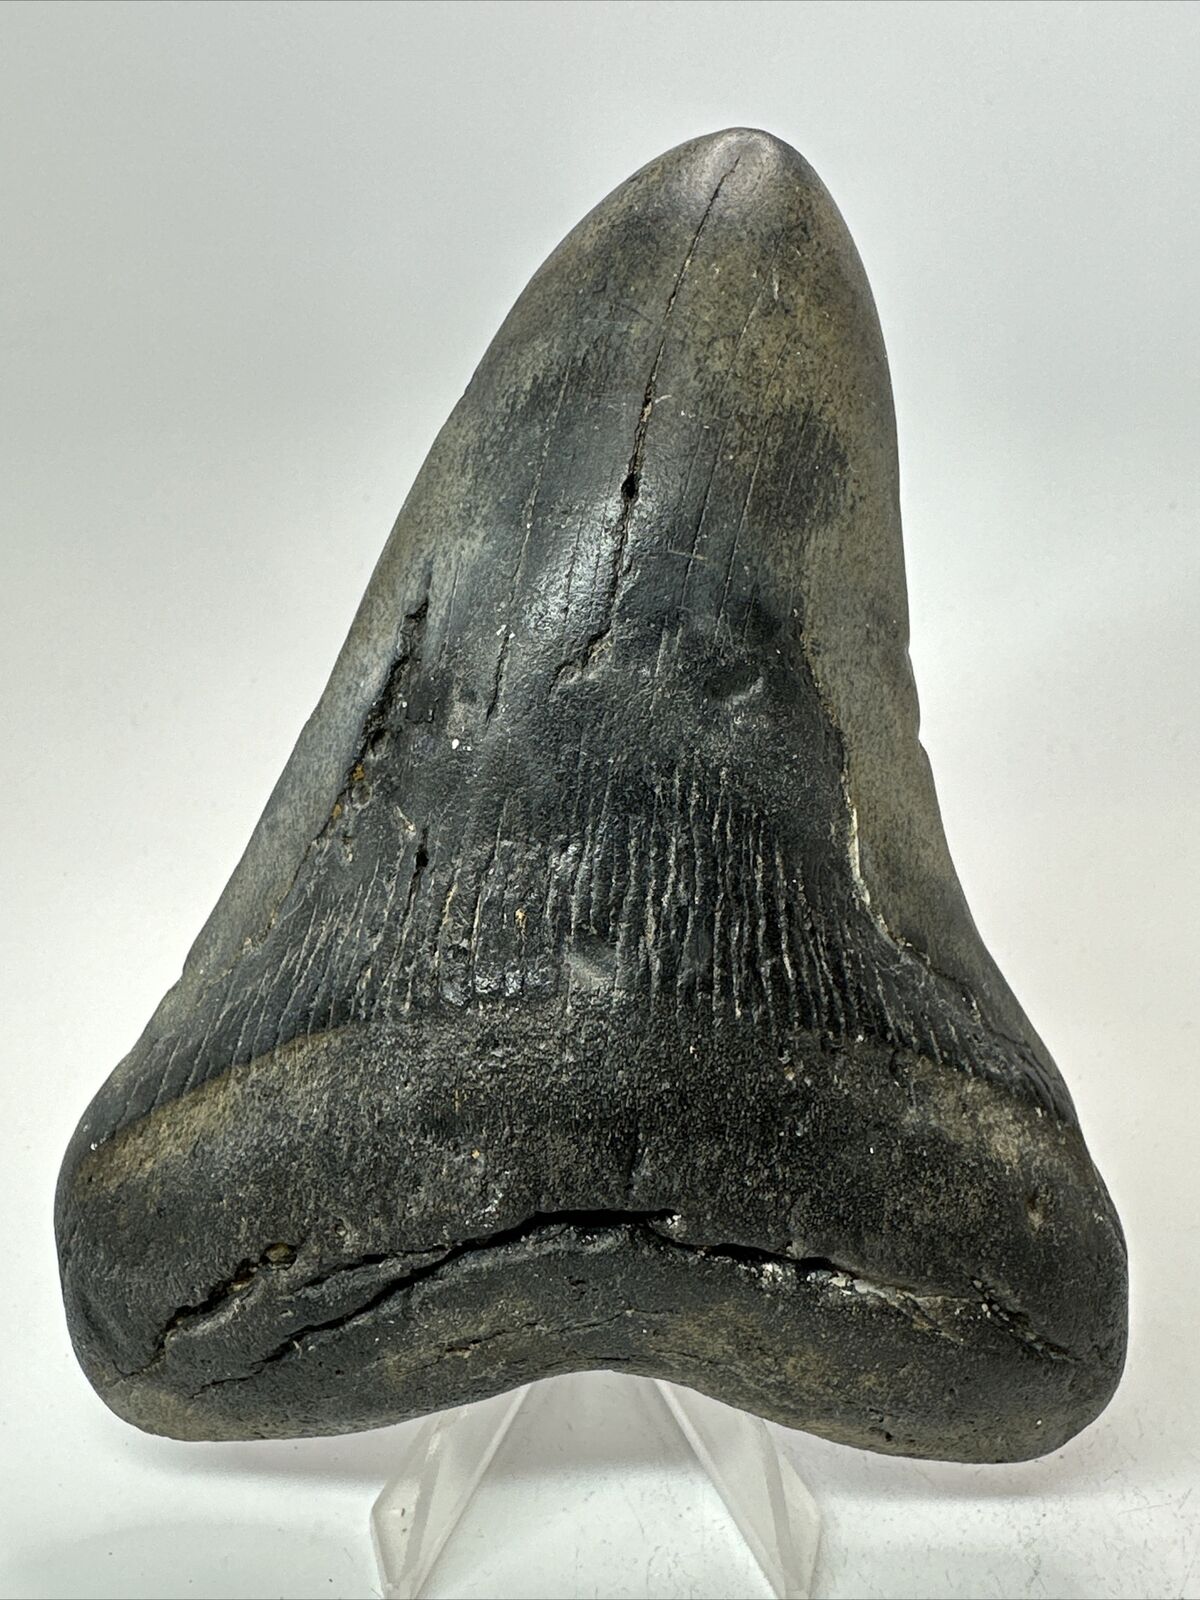 Megalodon Shark Tooth 5.29” Big - Natural Fossil - Authentic 17968